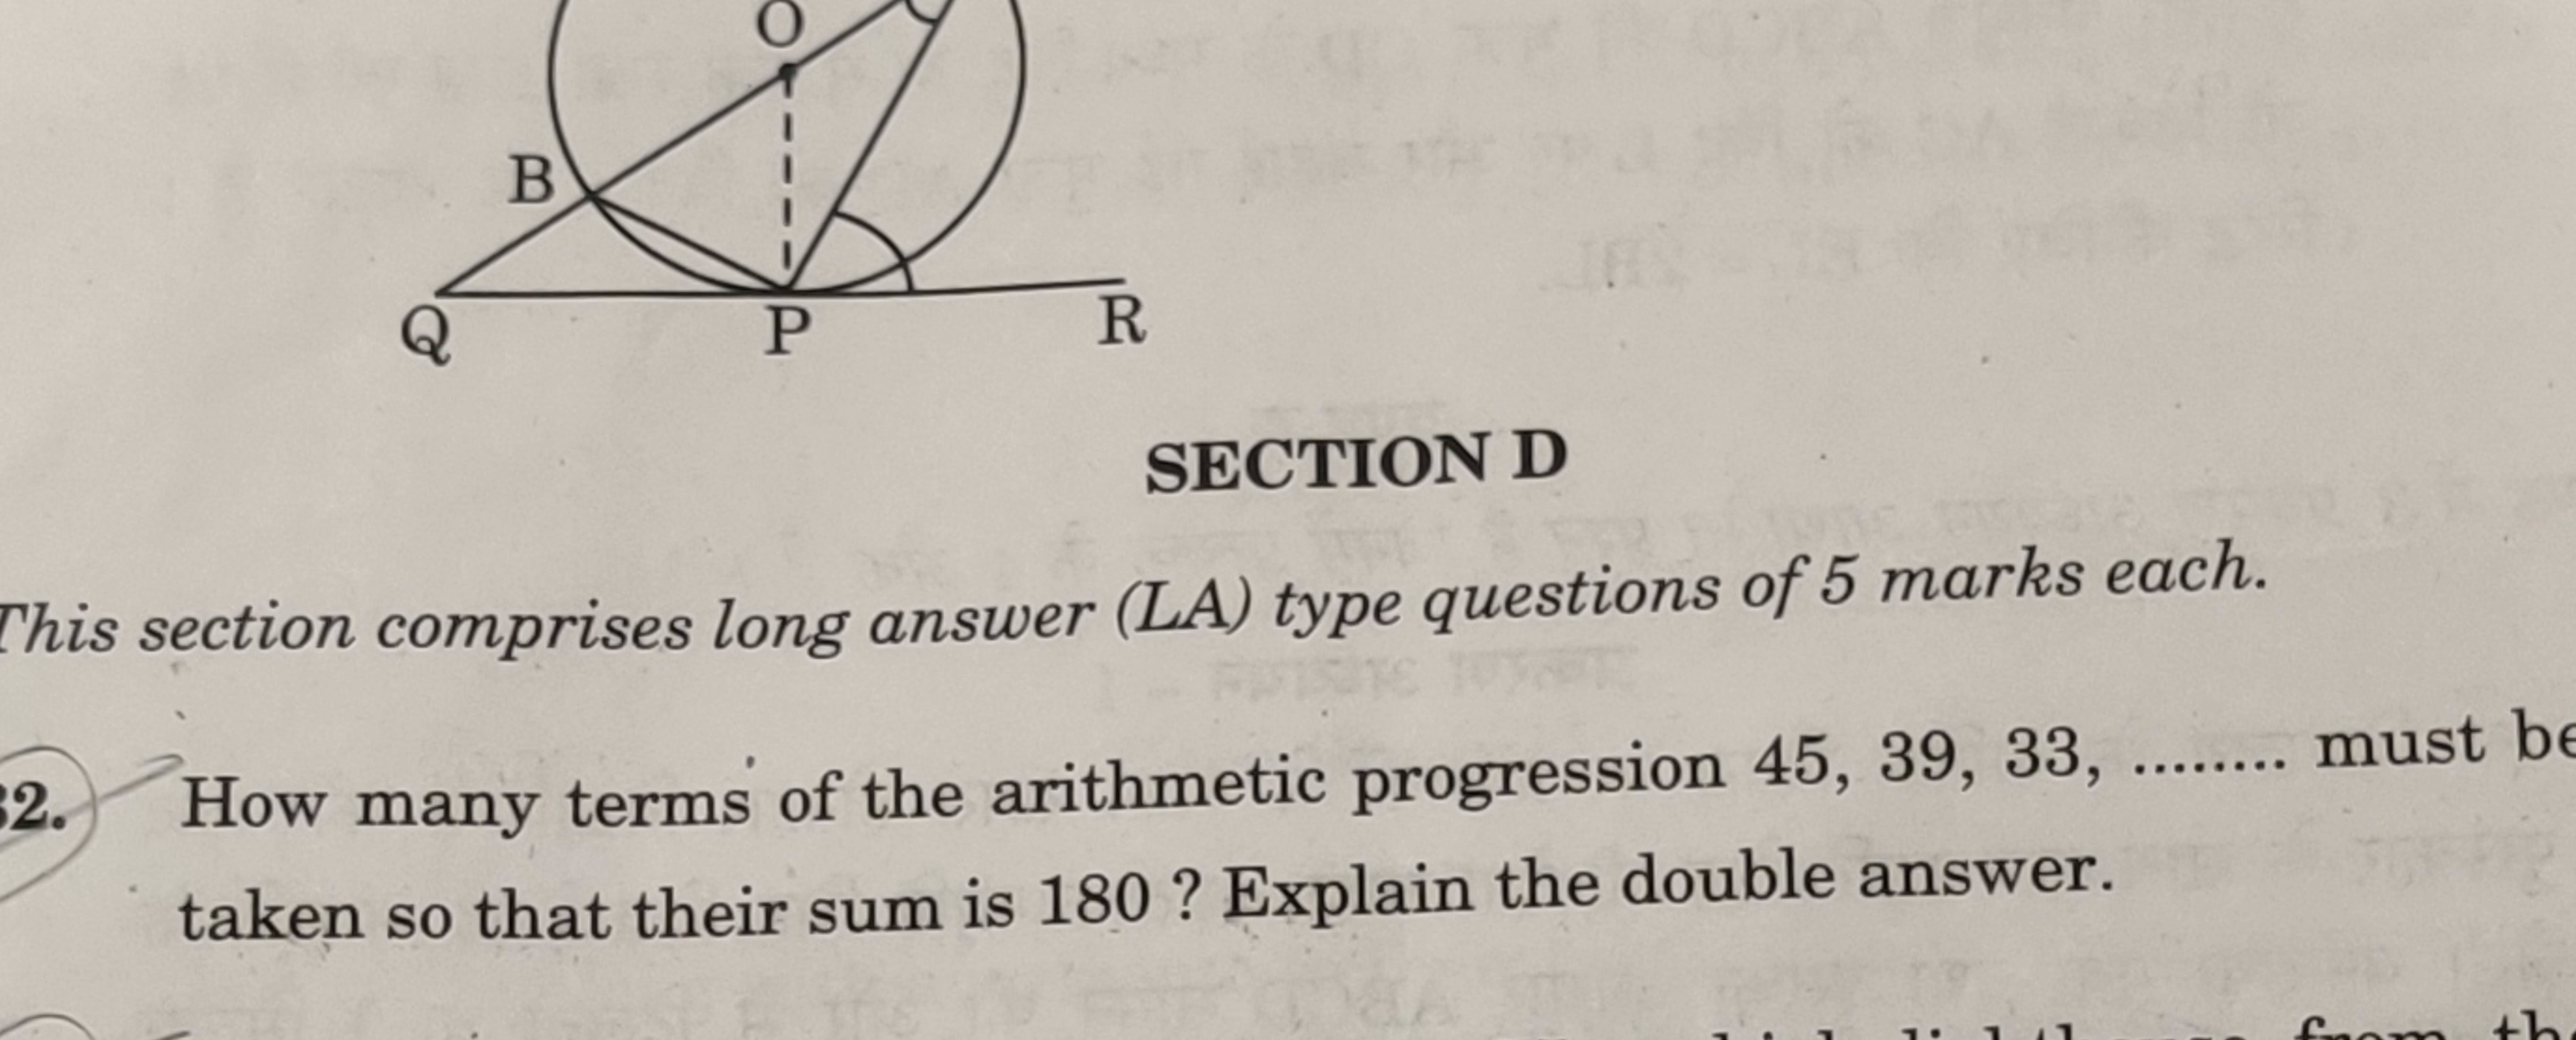 SECTION D
This section comprises long answer (LA) type questions of 5 